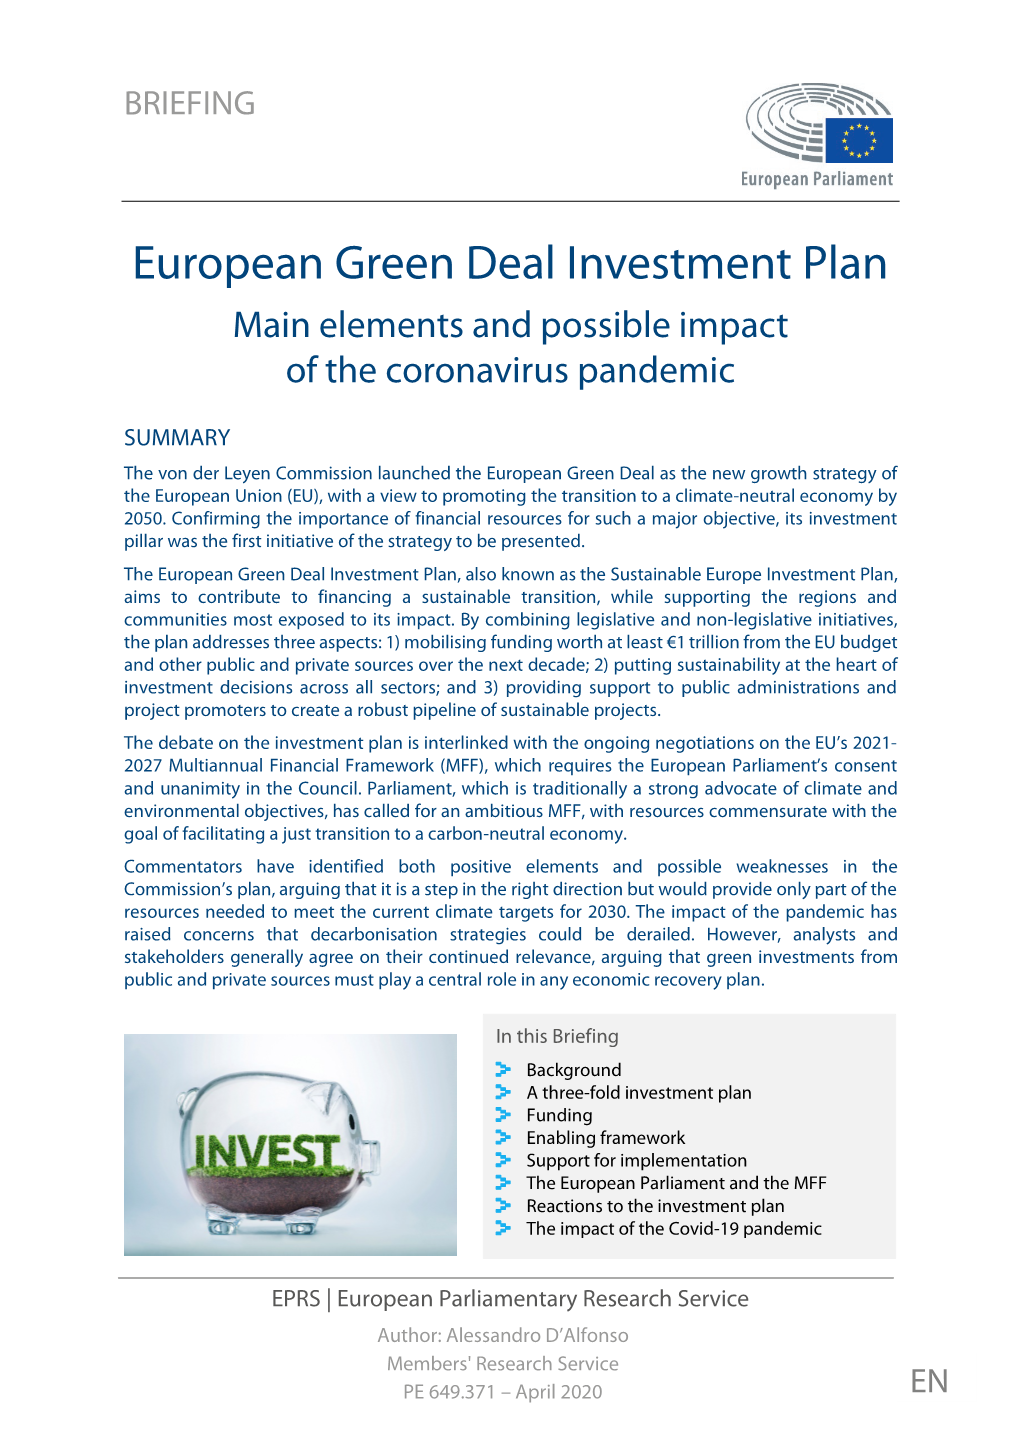 European Green Deal Investment Plan Main Elements and Possible Impact of the Coronavirus Pandemic